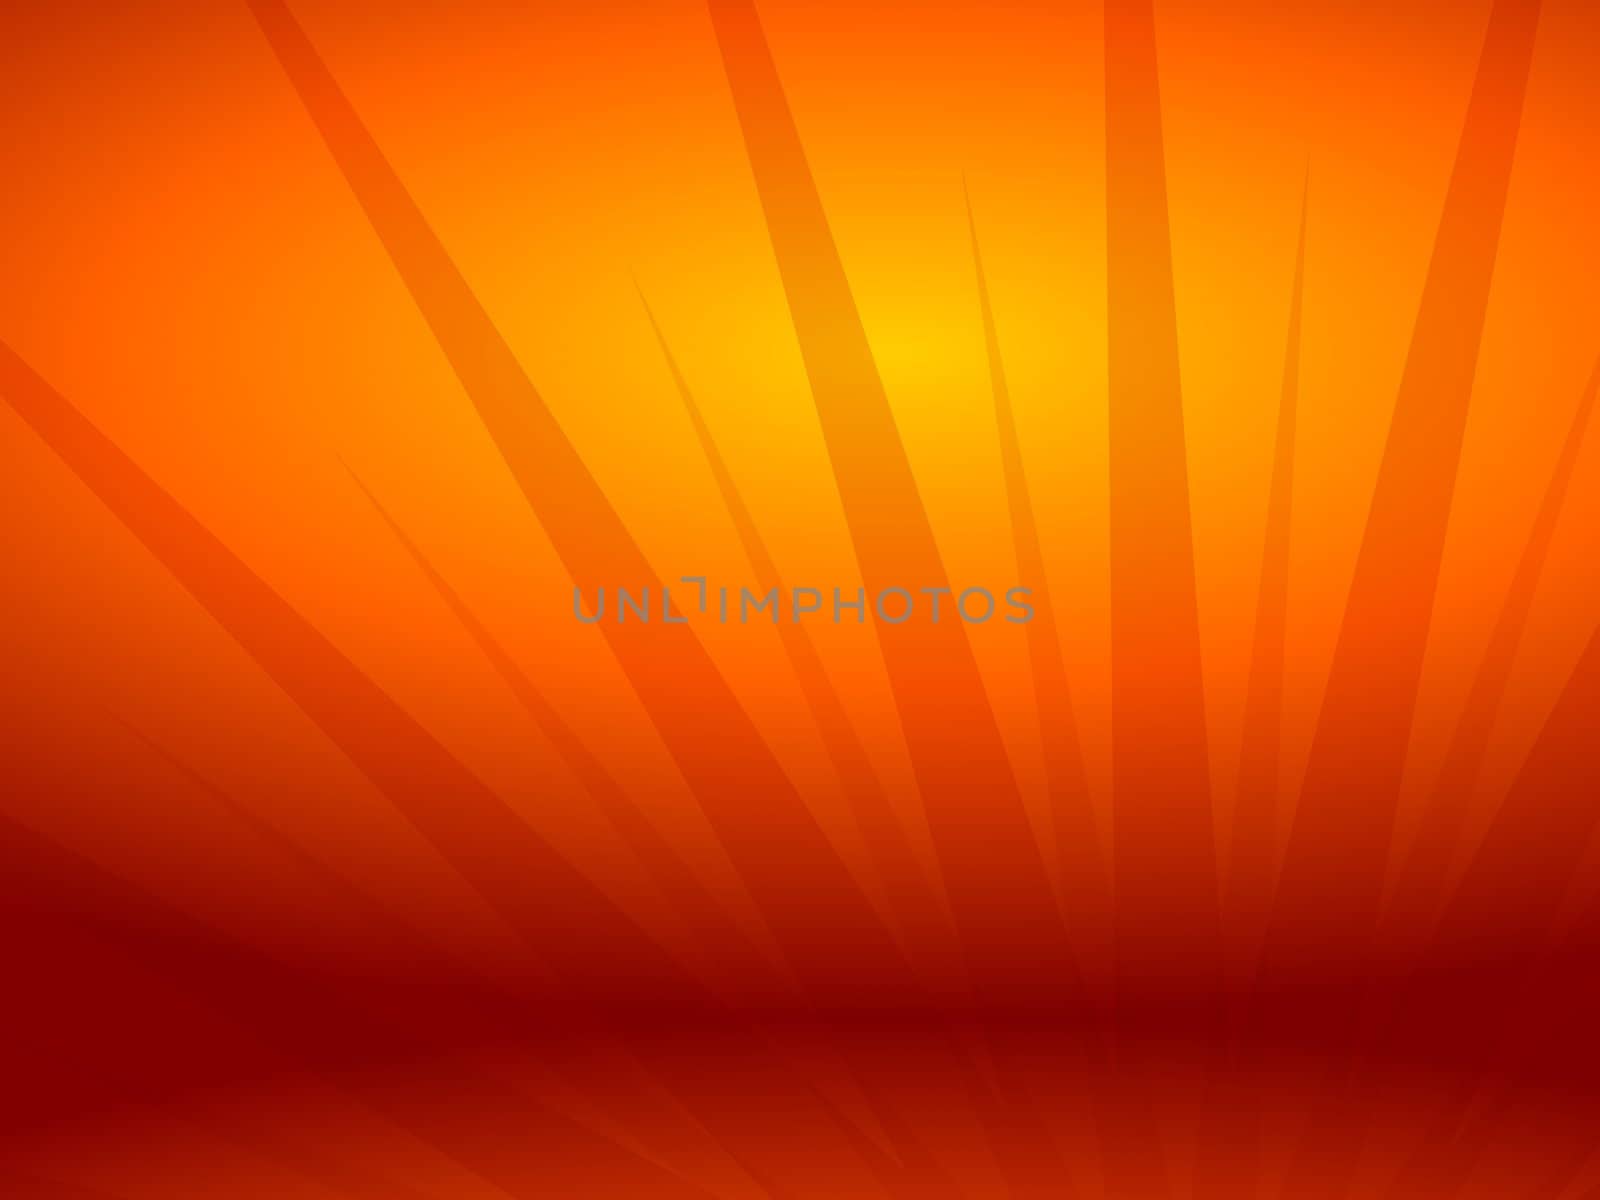 Rendered brightly background with red and orange rays